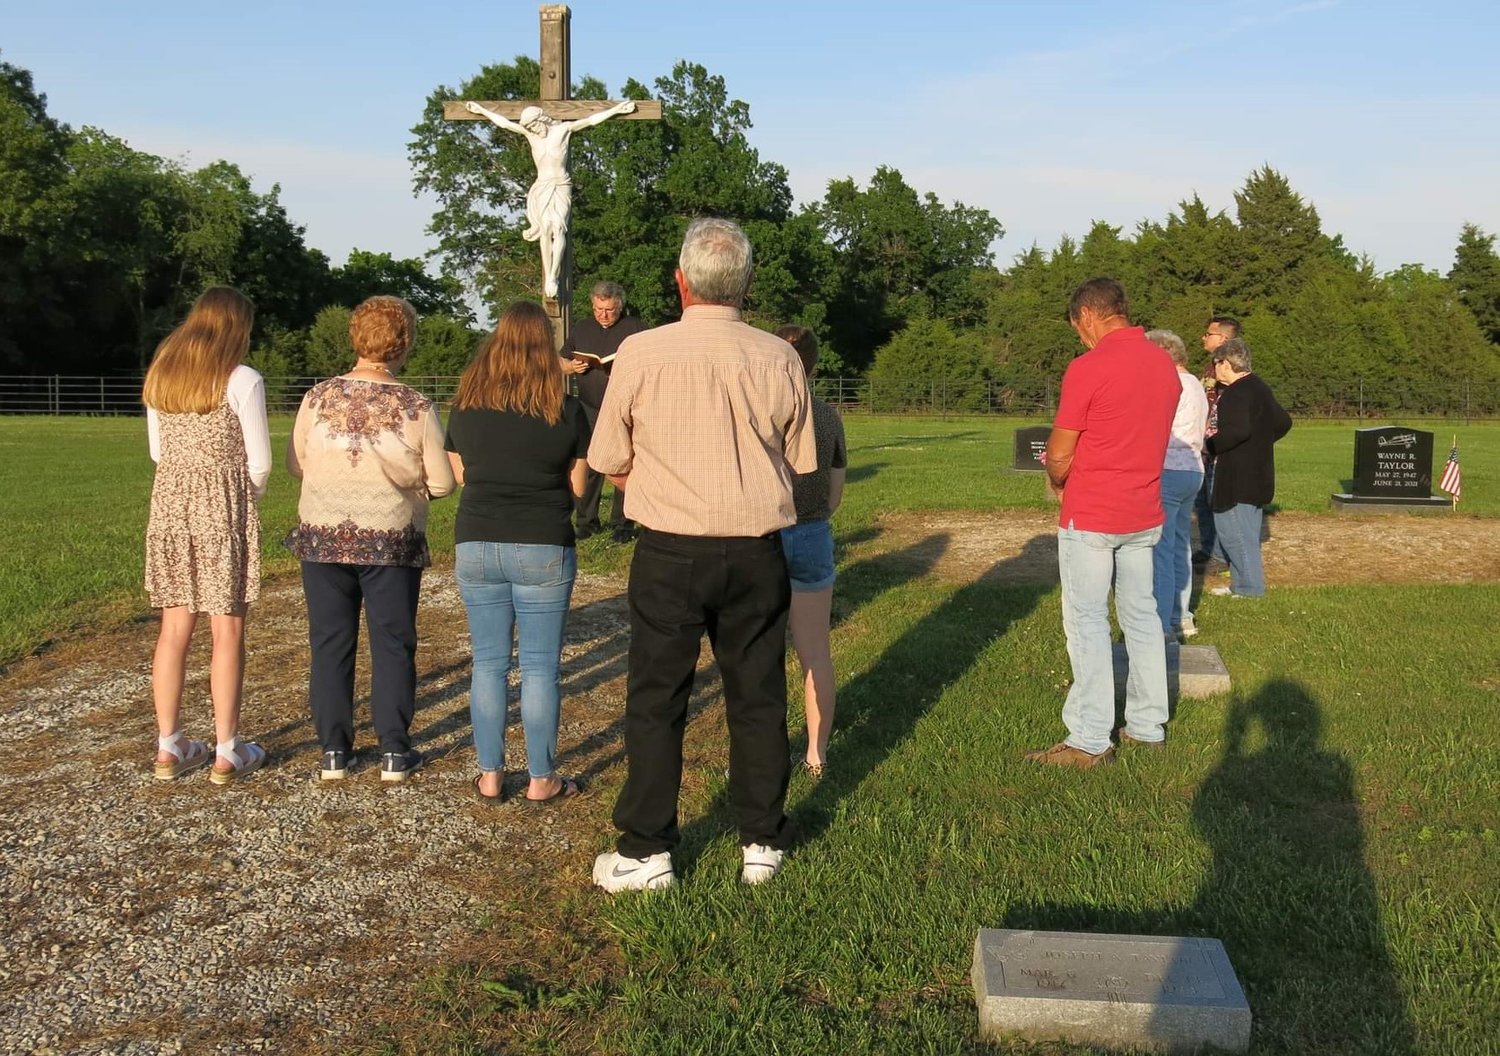 Catholics gather in St. Joseph Cemetery in Clifton City the Saturday before Memorial Day for Mass with Father Mark Smith and the blessing of the graves.